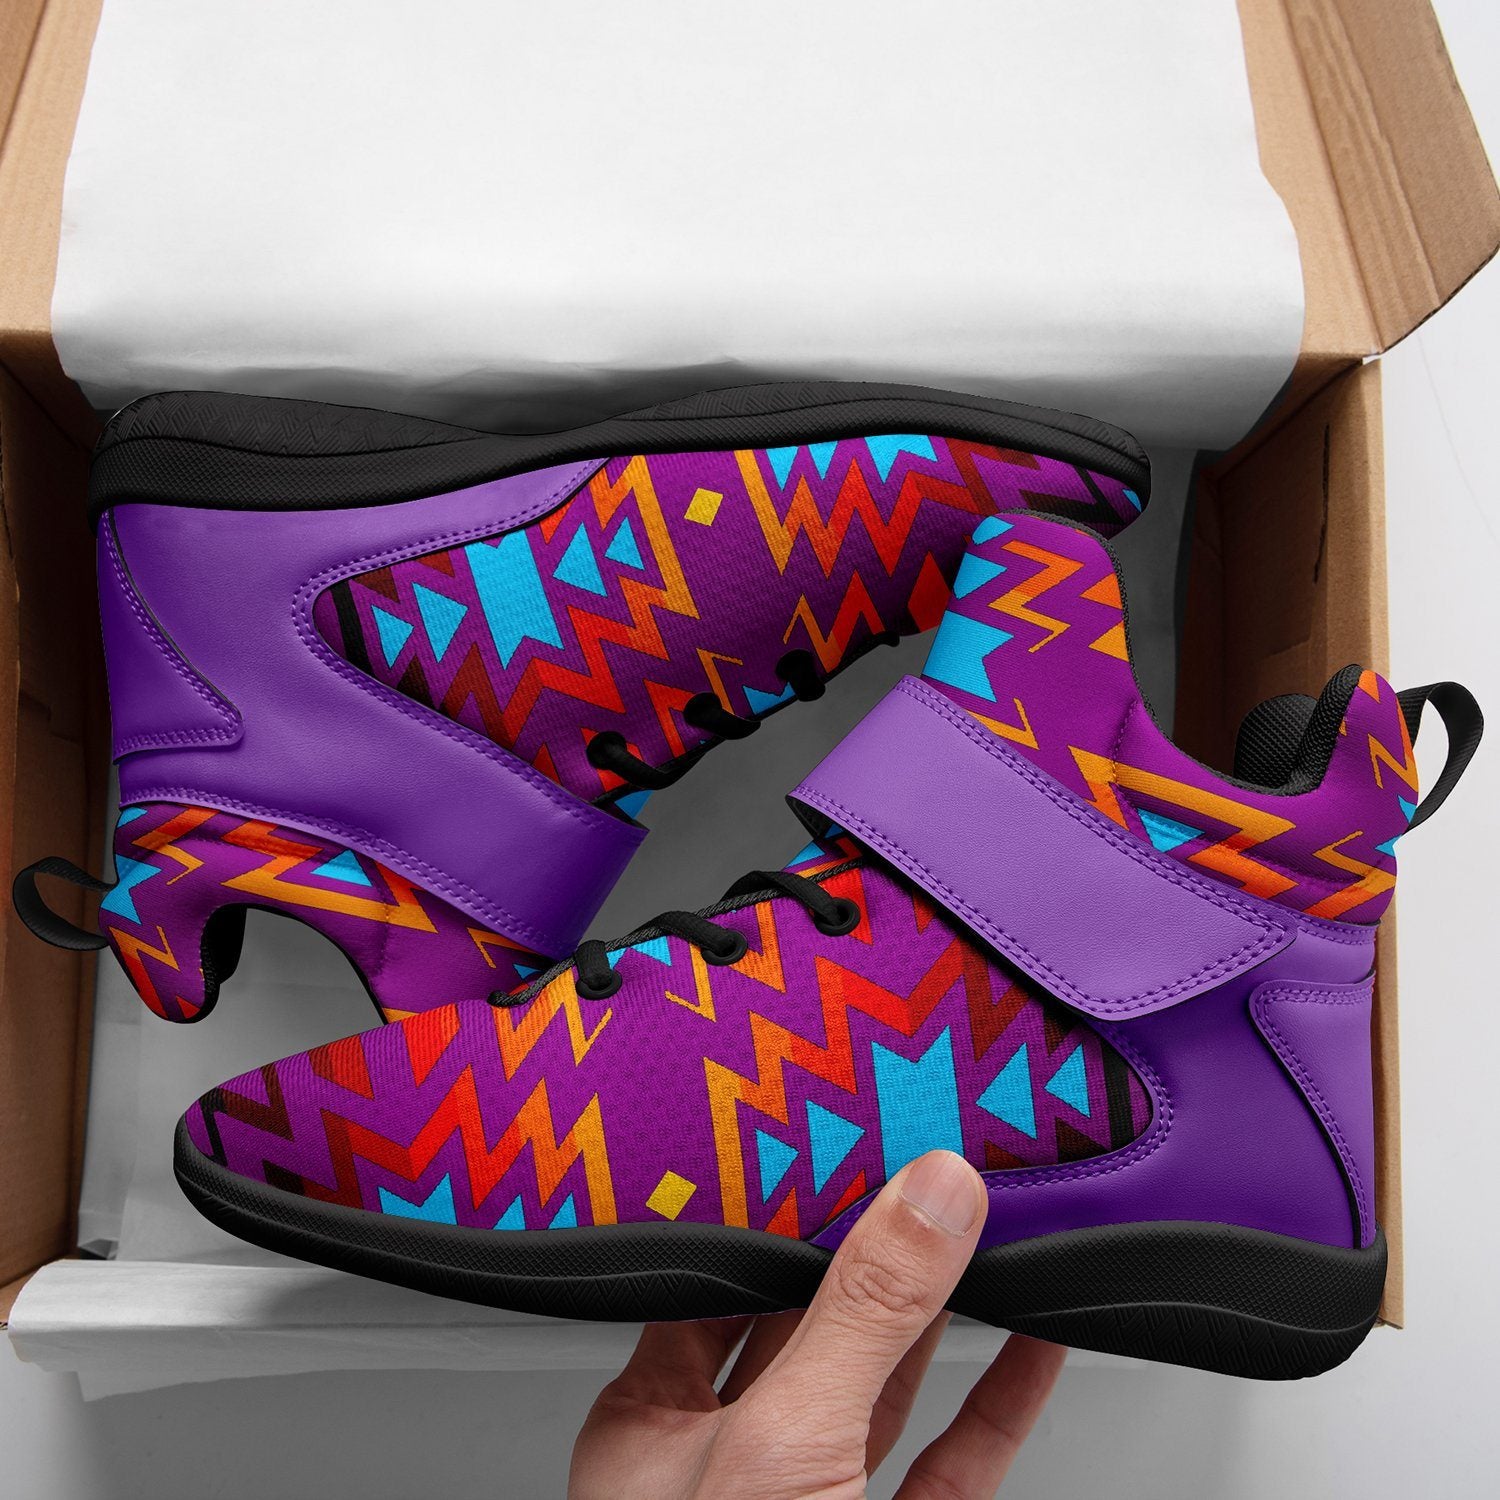 Fire Colors and Turquoise Purple Ipottaa Basketball / Sport High Top Shoes 49 Dzine 